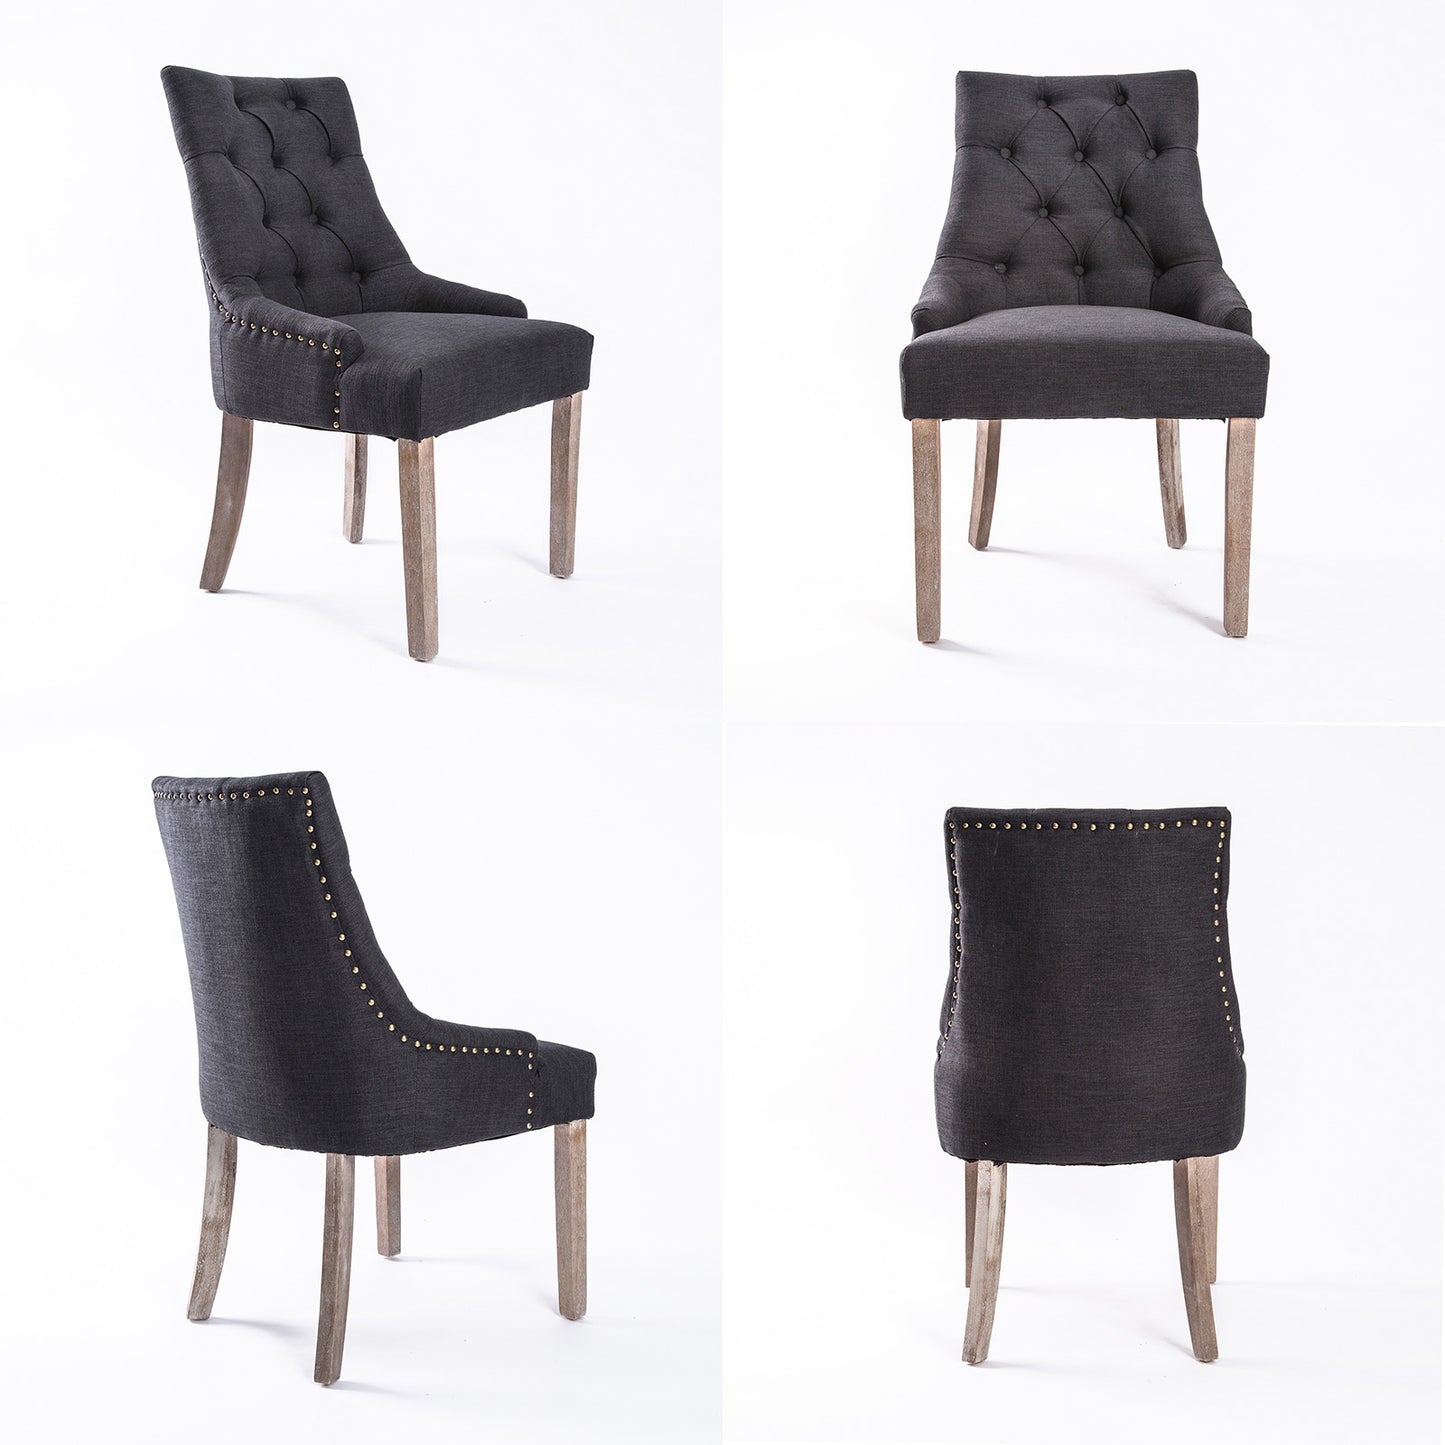 2 Set Black (Charcoal) French Provincial Dining Chair Amour Oak Leg - image4